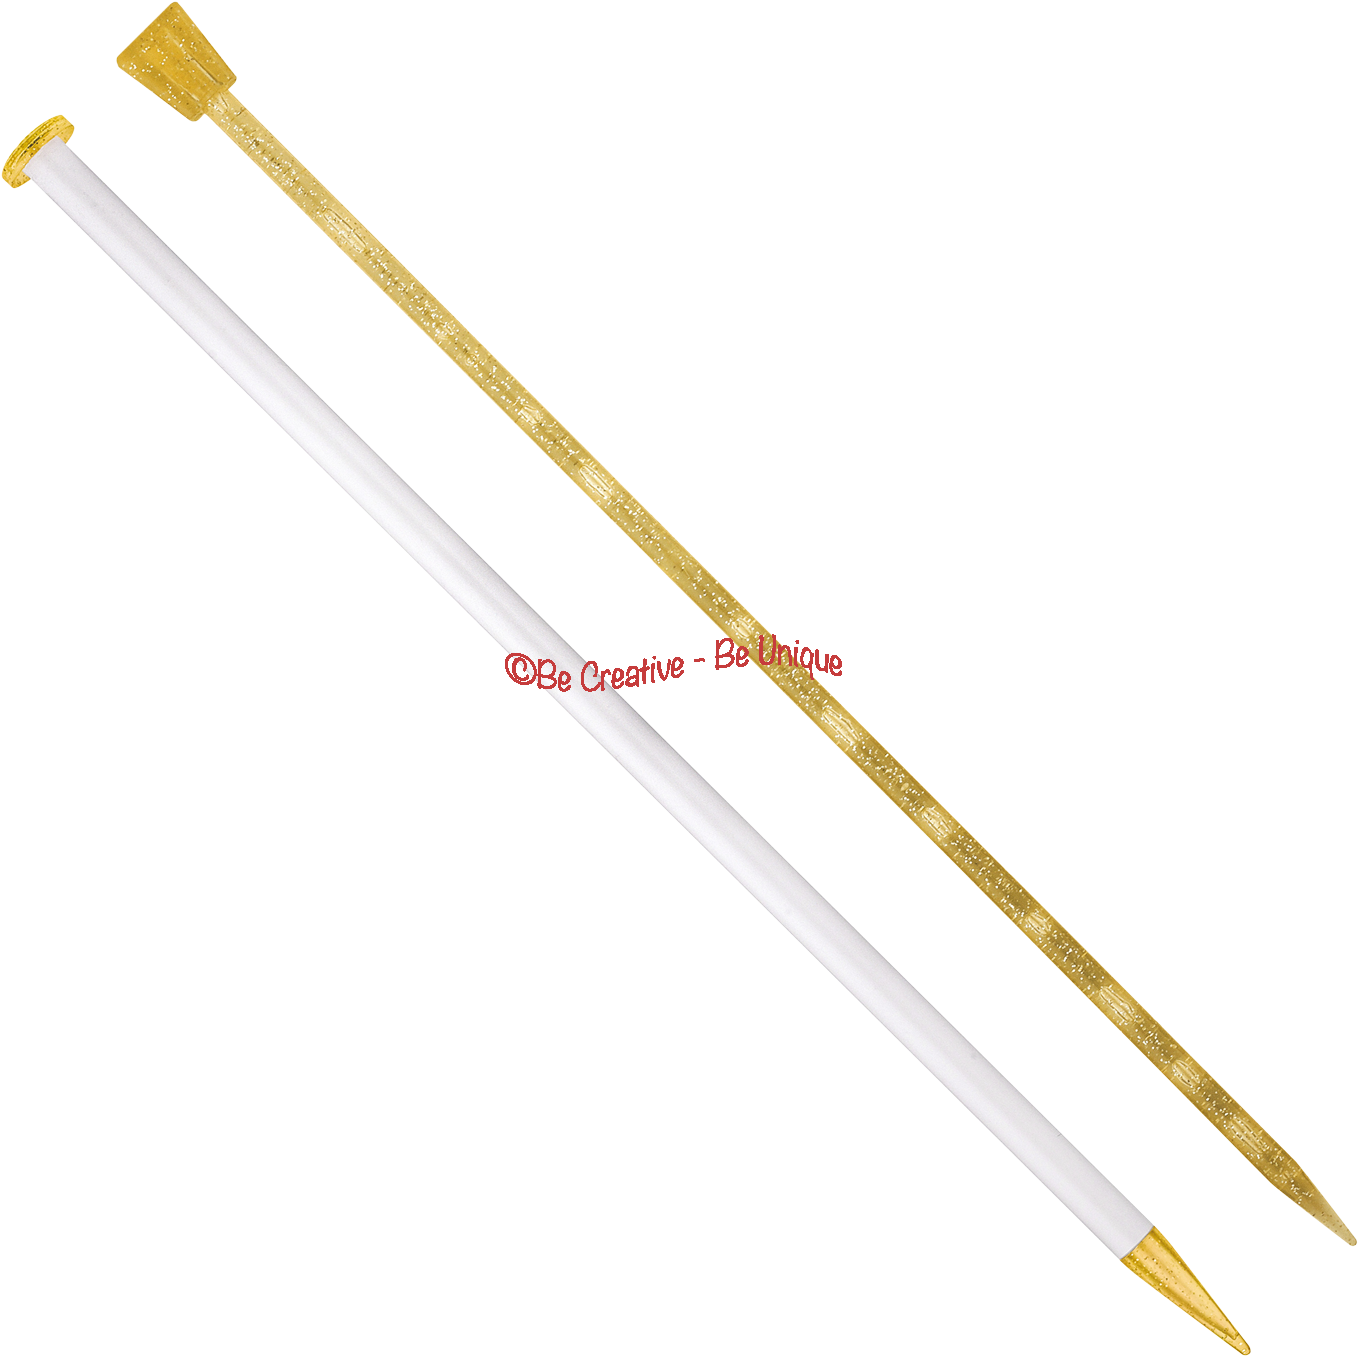 A Pair Of Gold And White Sticks